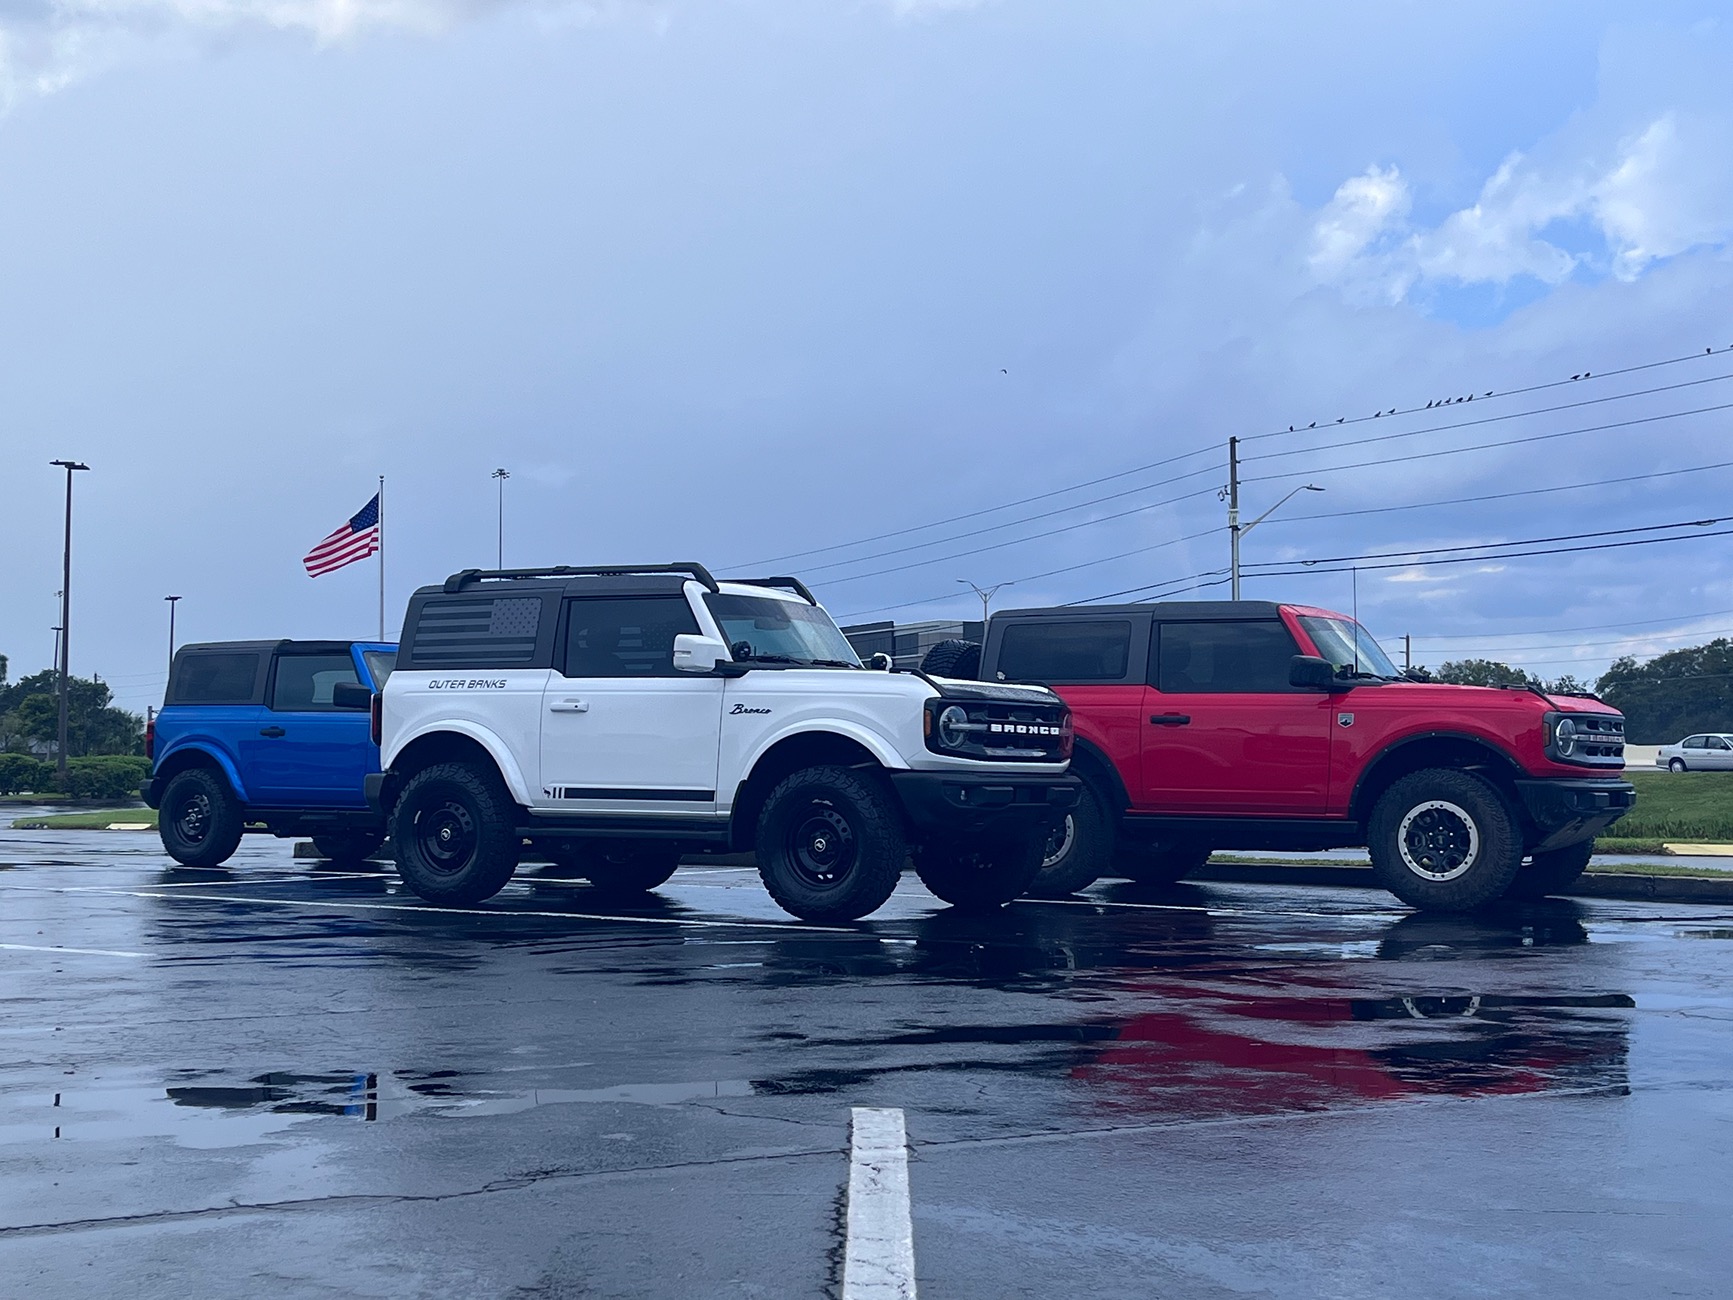 Ford Bronco The Official Bronco6G Photo Challenge Game 📸 🤳 28DD6447-1B42-470B-99A2-A7501624BEA3